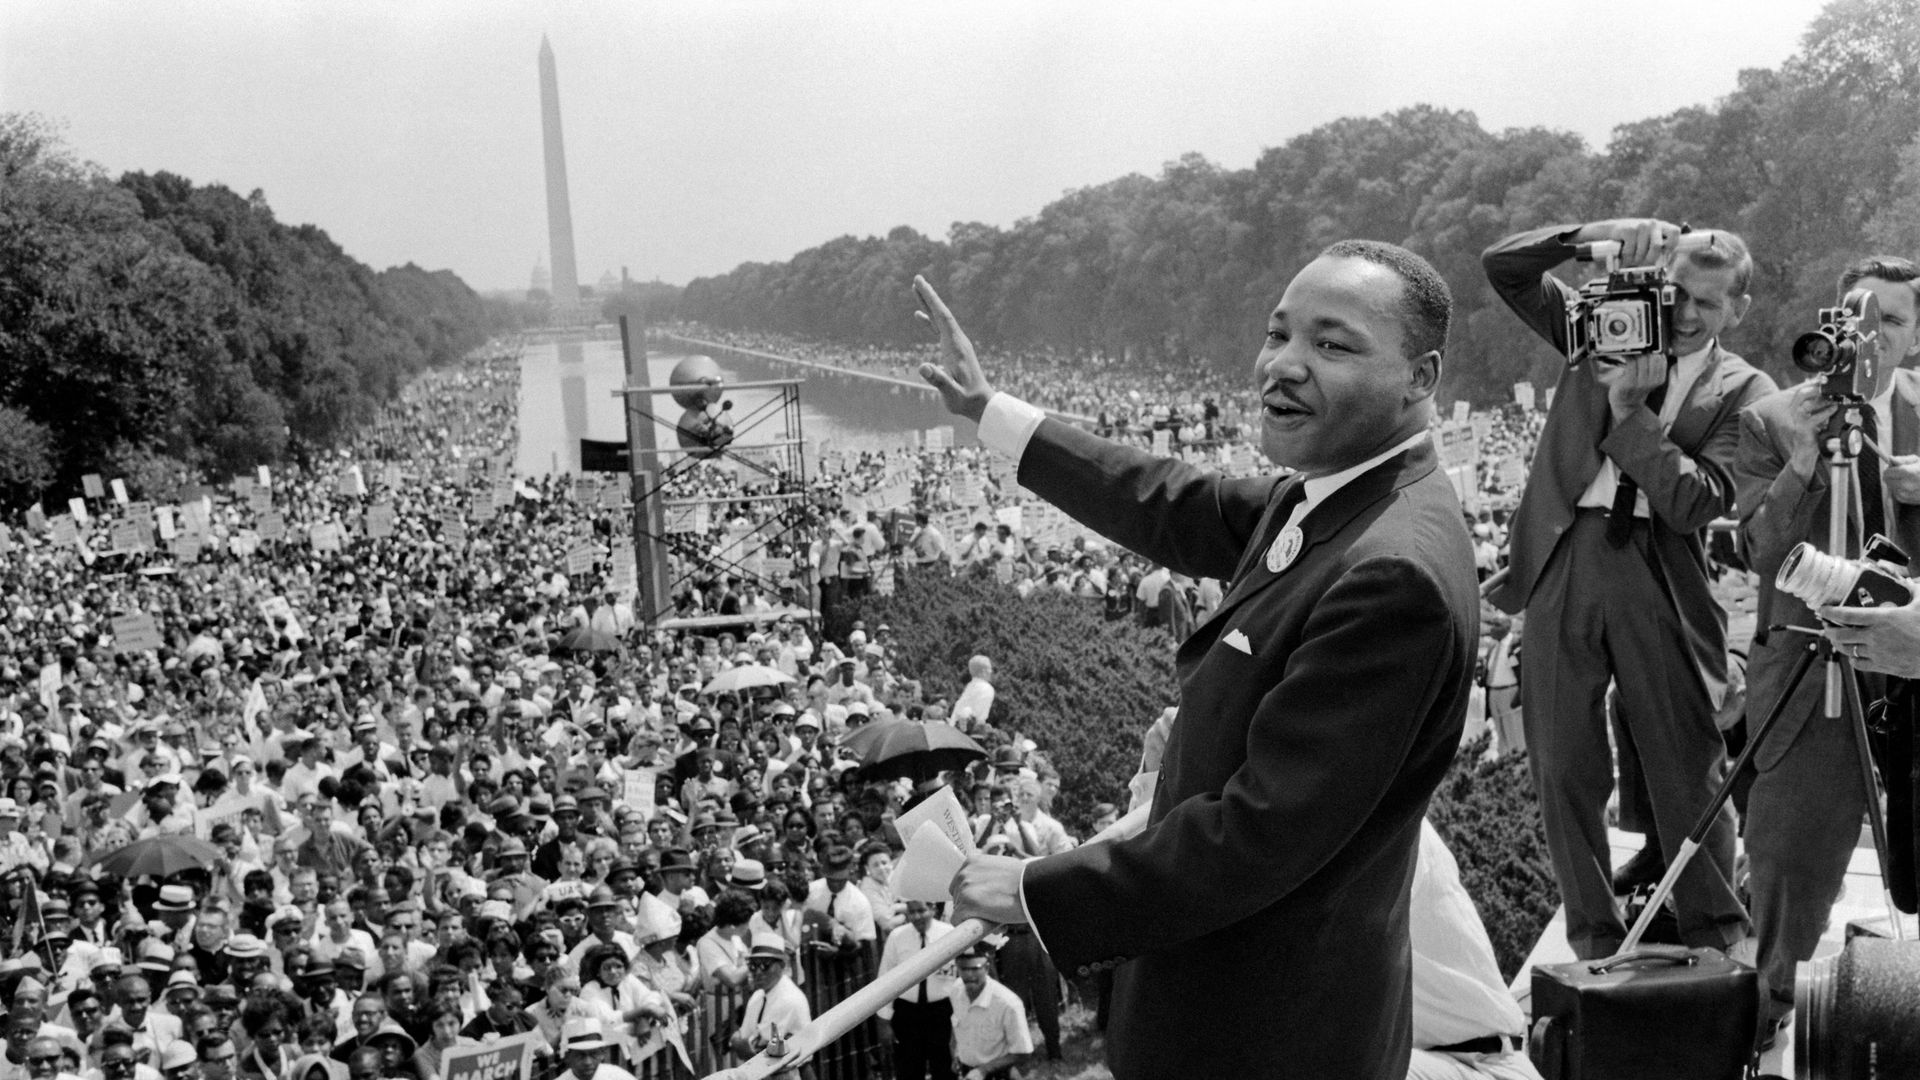 Martin Luther King (C) waves to supporters 28 August 1963 on the Mall in Washington DC (Washington Monument in background) during the "March on Washington", where King delivered his famous "I Have a Dream" speech.